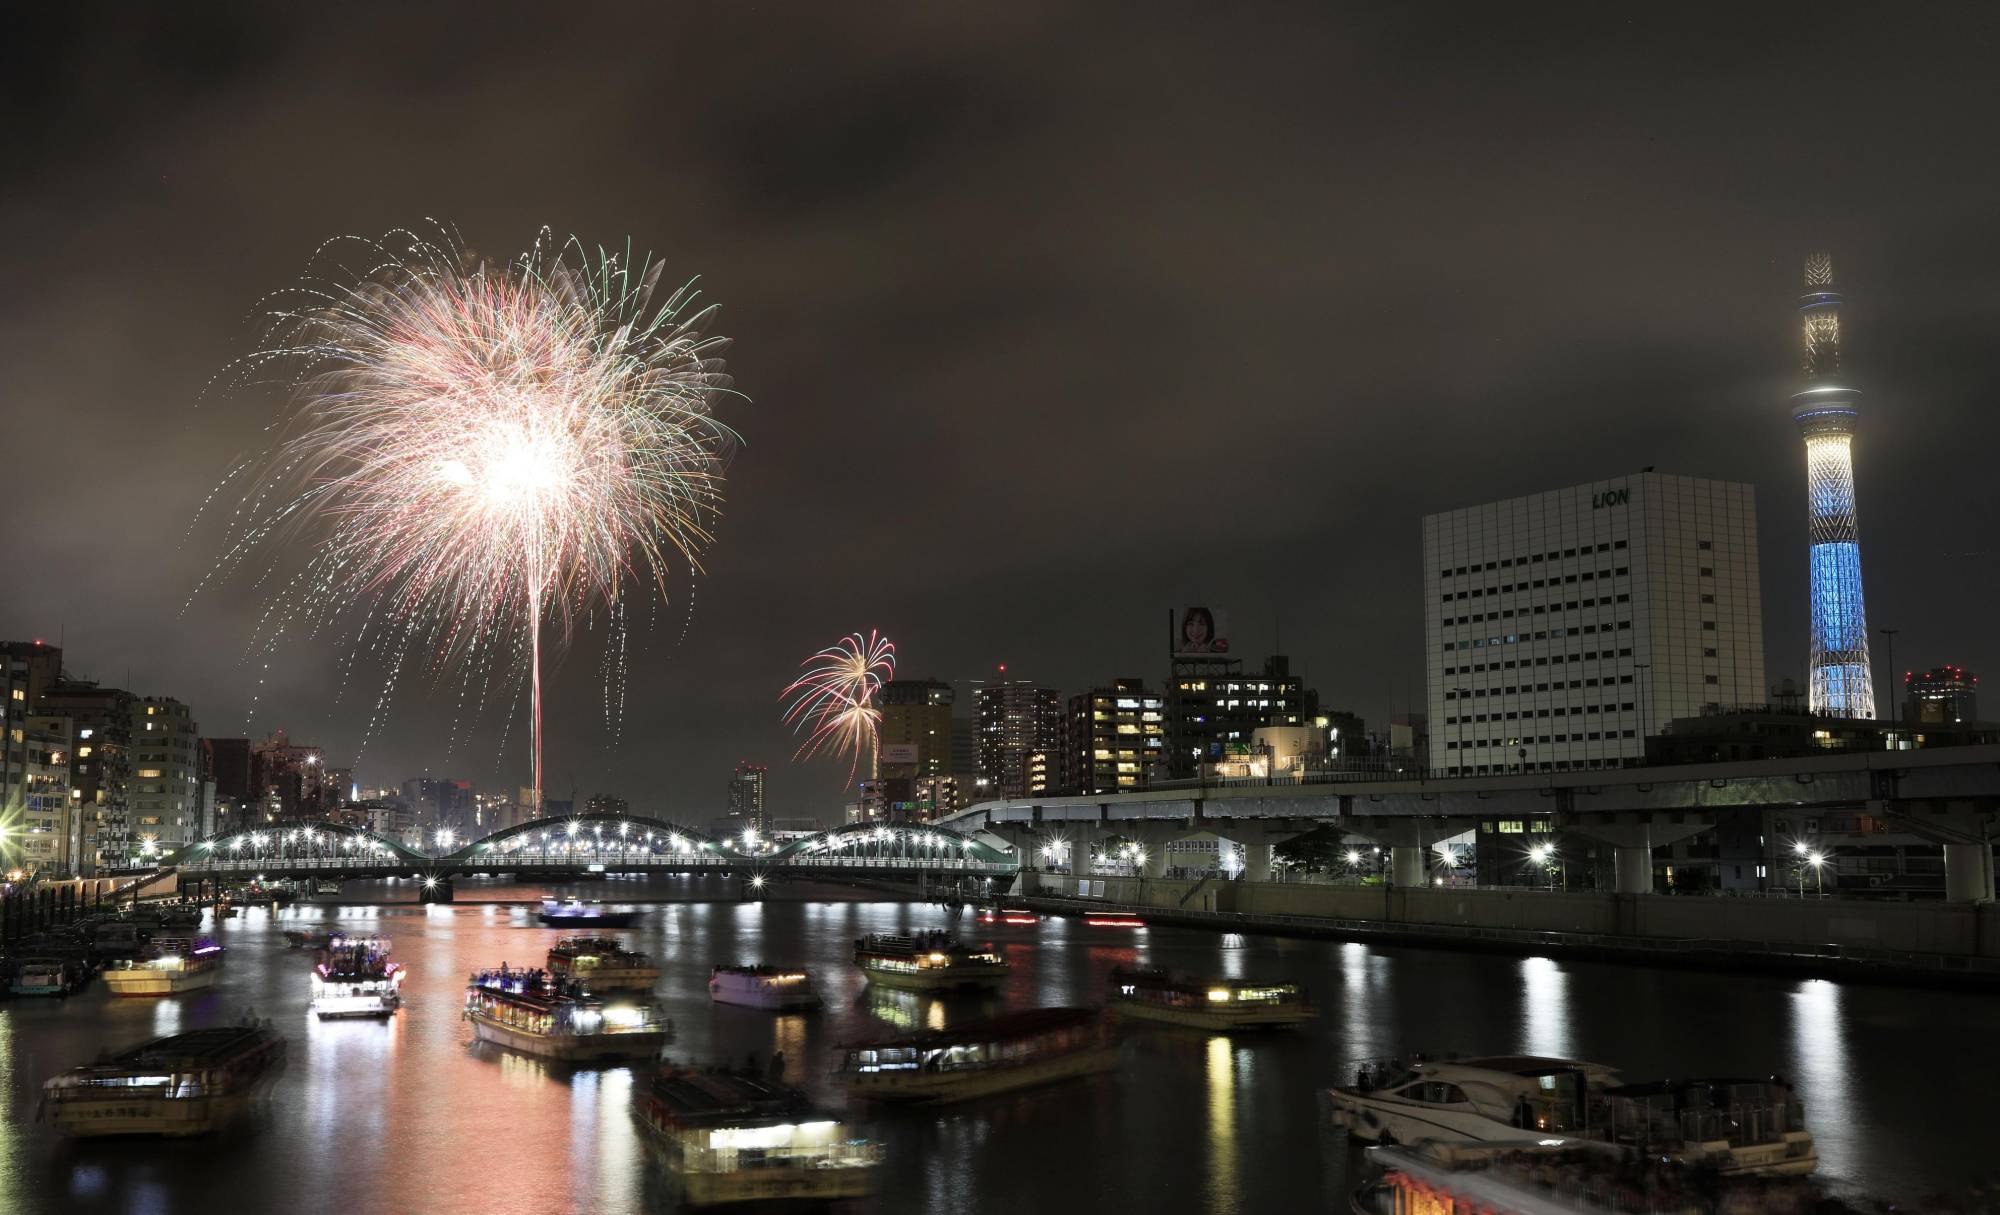 Fireworks are displayed over the Sumida River in Tokyo last July. The coronavirus pandemic has forced firework displays and other summer events across the country to be canceled. | KYODO